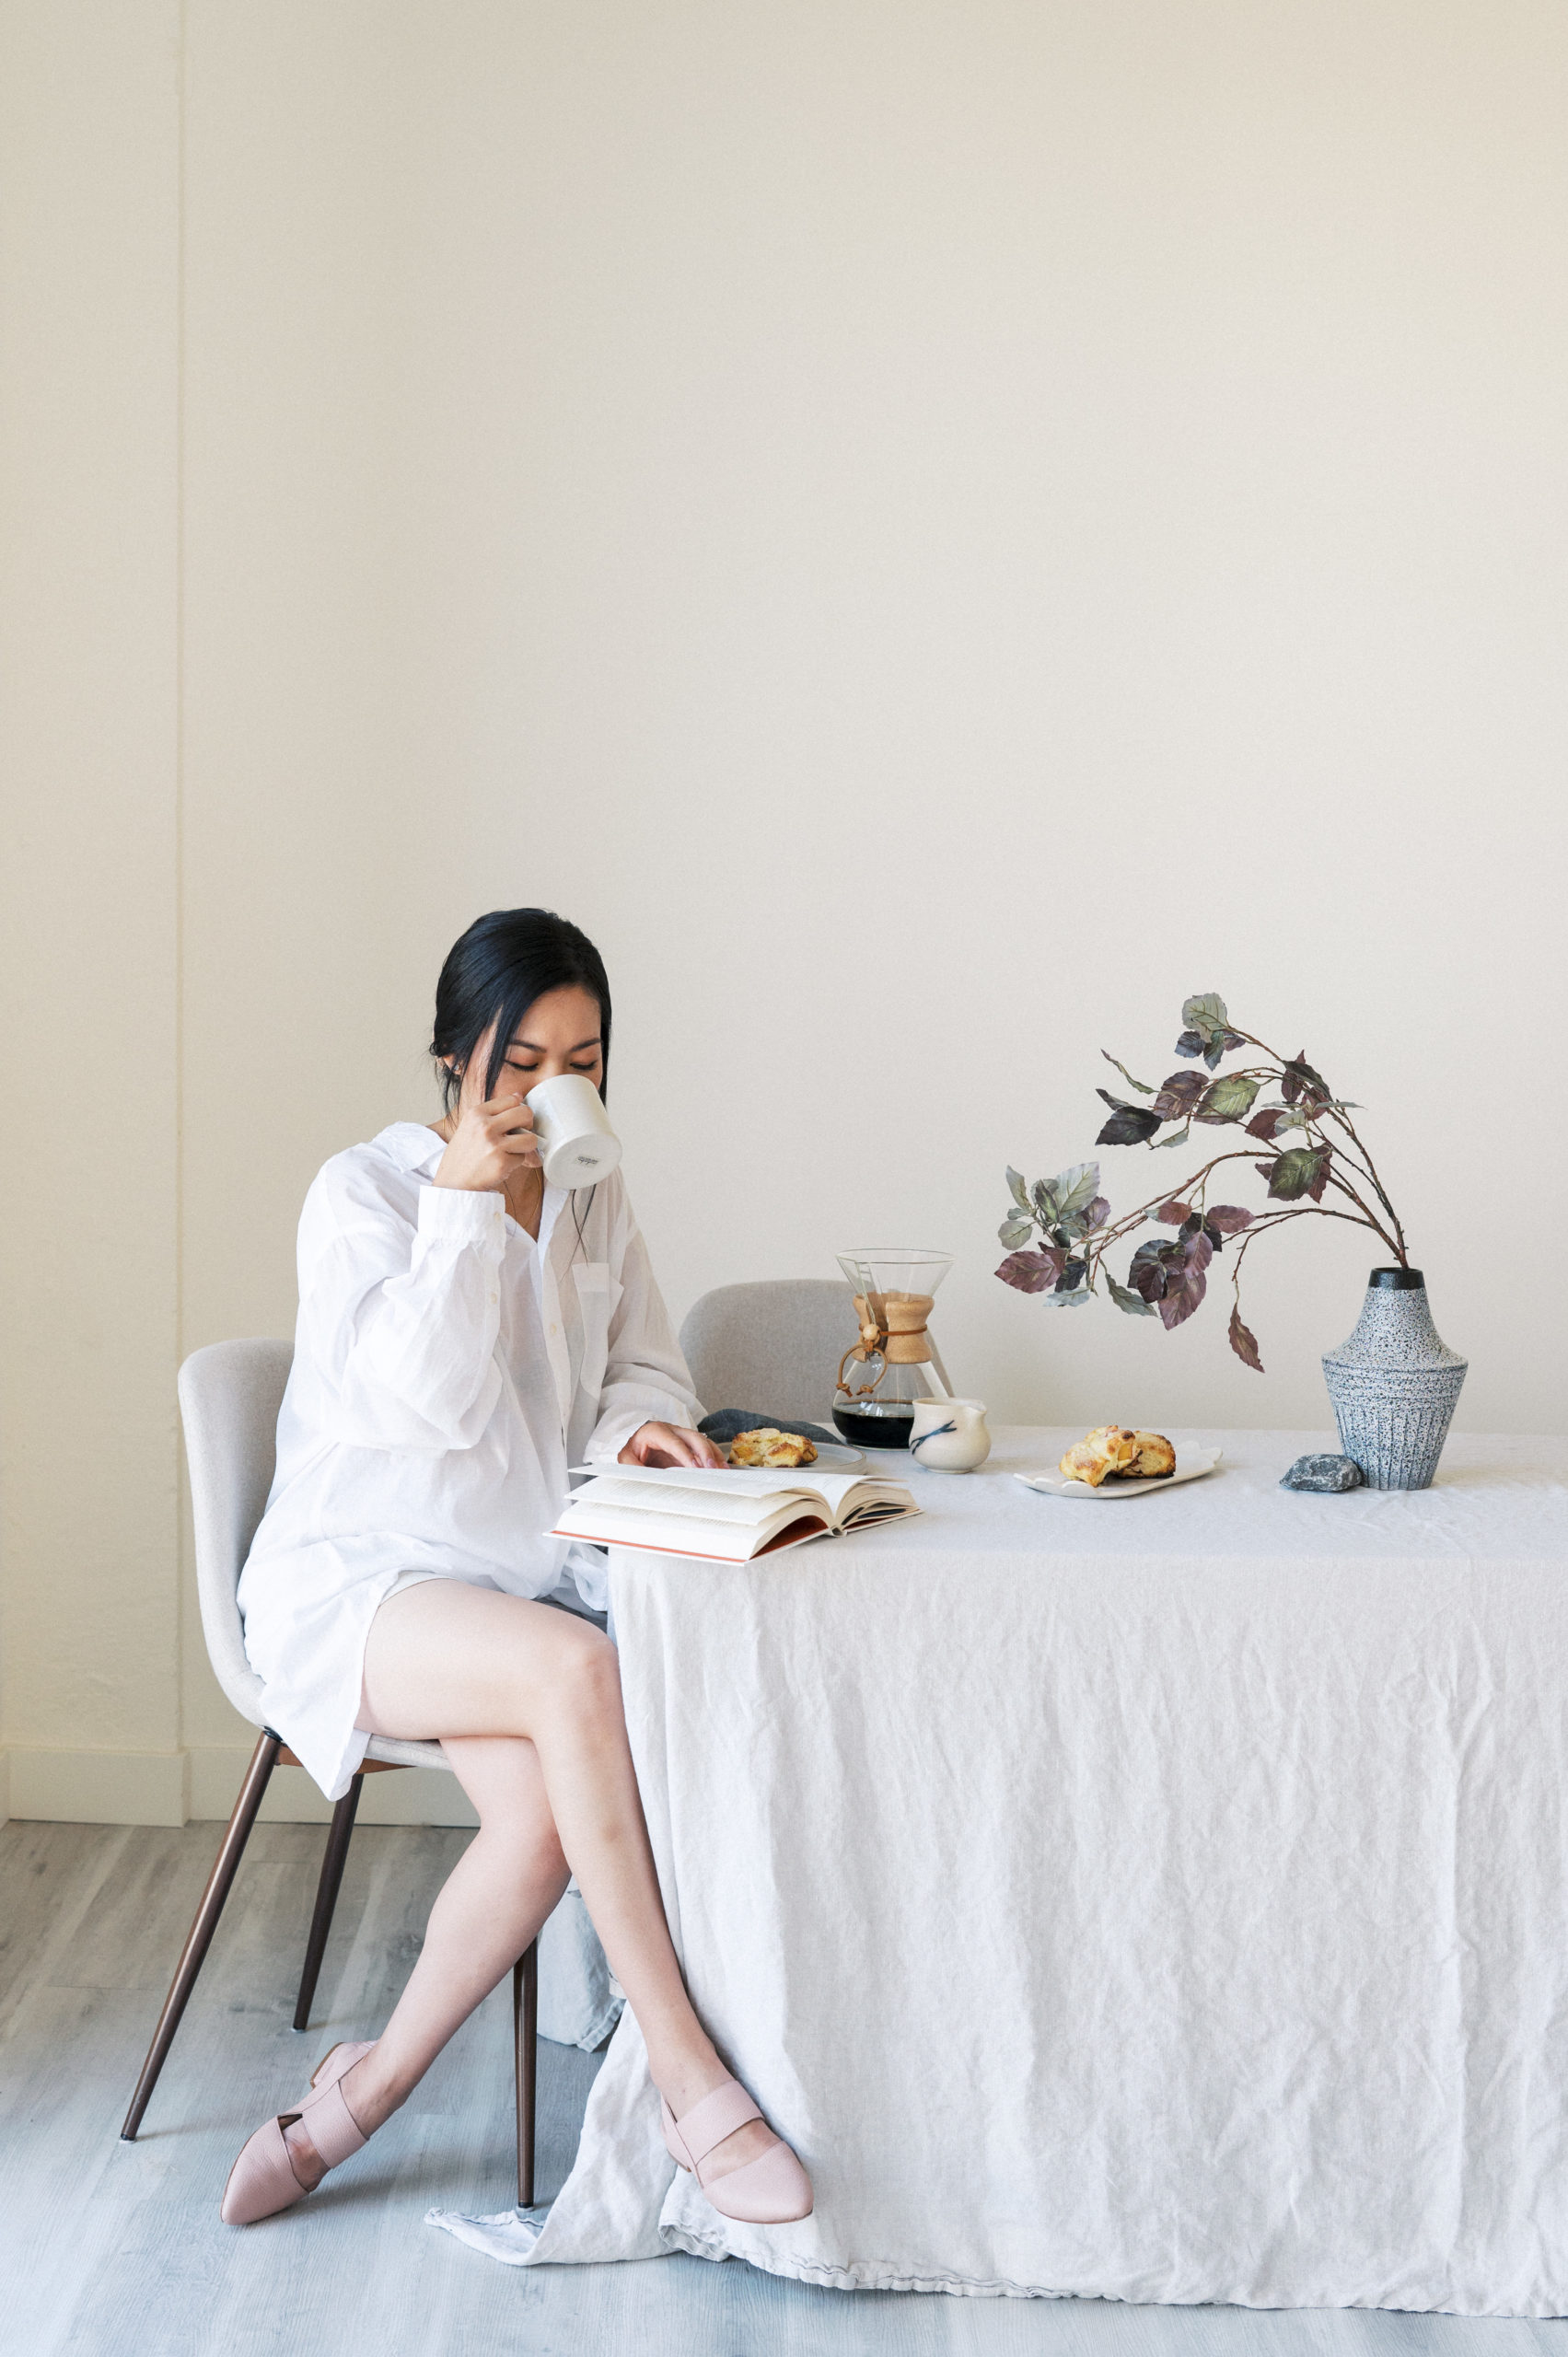 Edmonton Personal Branding Photography  Woman sitting and drinking coffee at a table with linen table cloth while reading a book